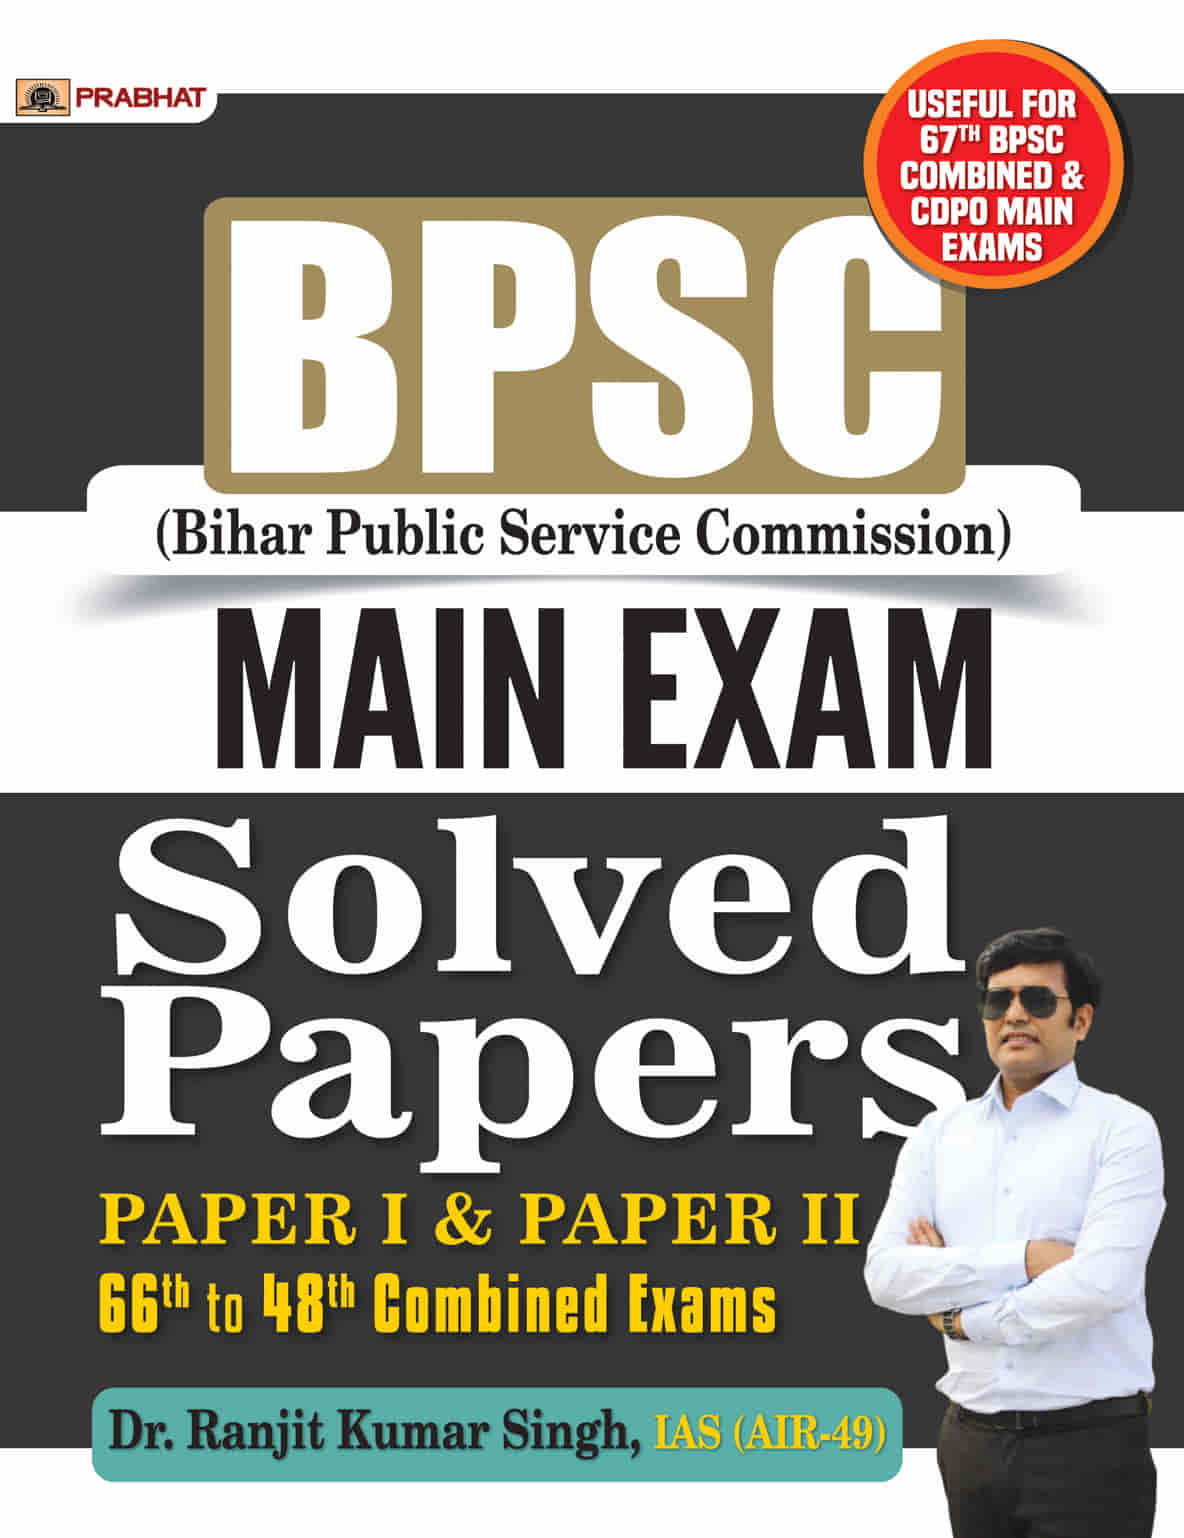 BPSC (Bihar PUBLIC SERVICE COMMISSION) MAIN exam SOLVED PAPERS Paper I & paper II 66th to 48th Combined Exams